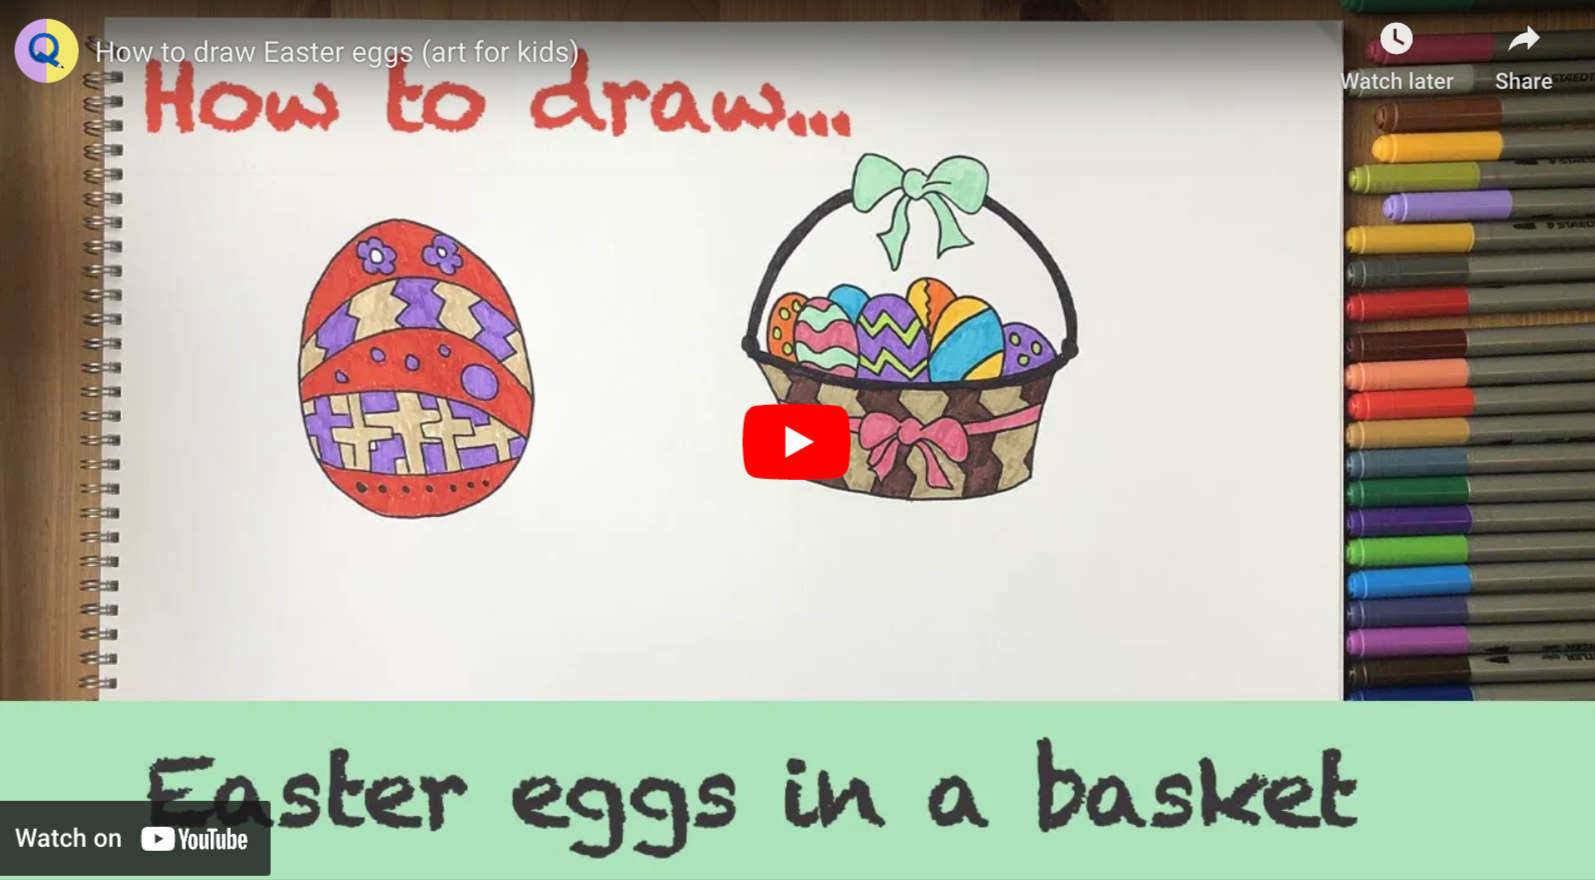 Load video: How to draw Easter eggs video